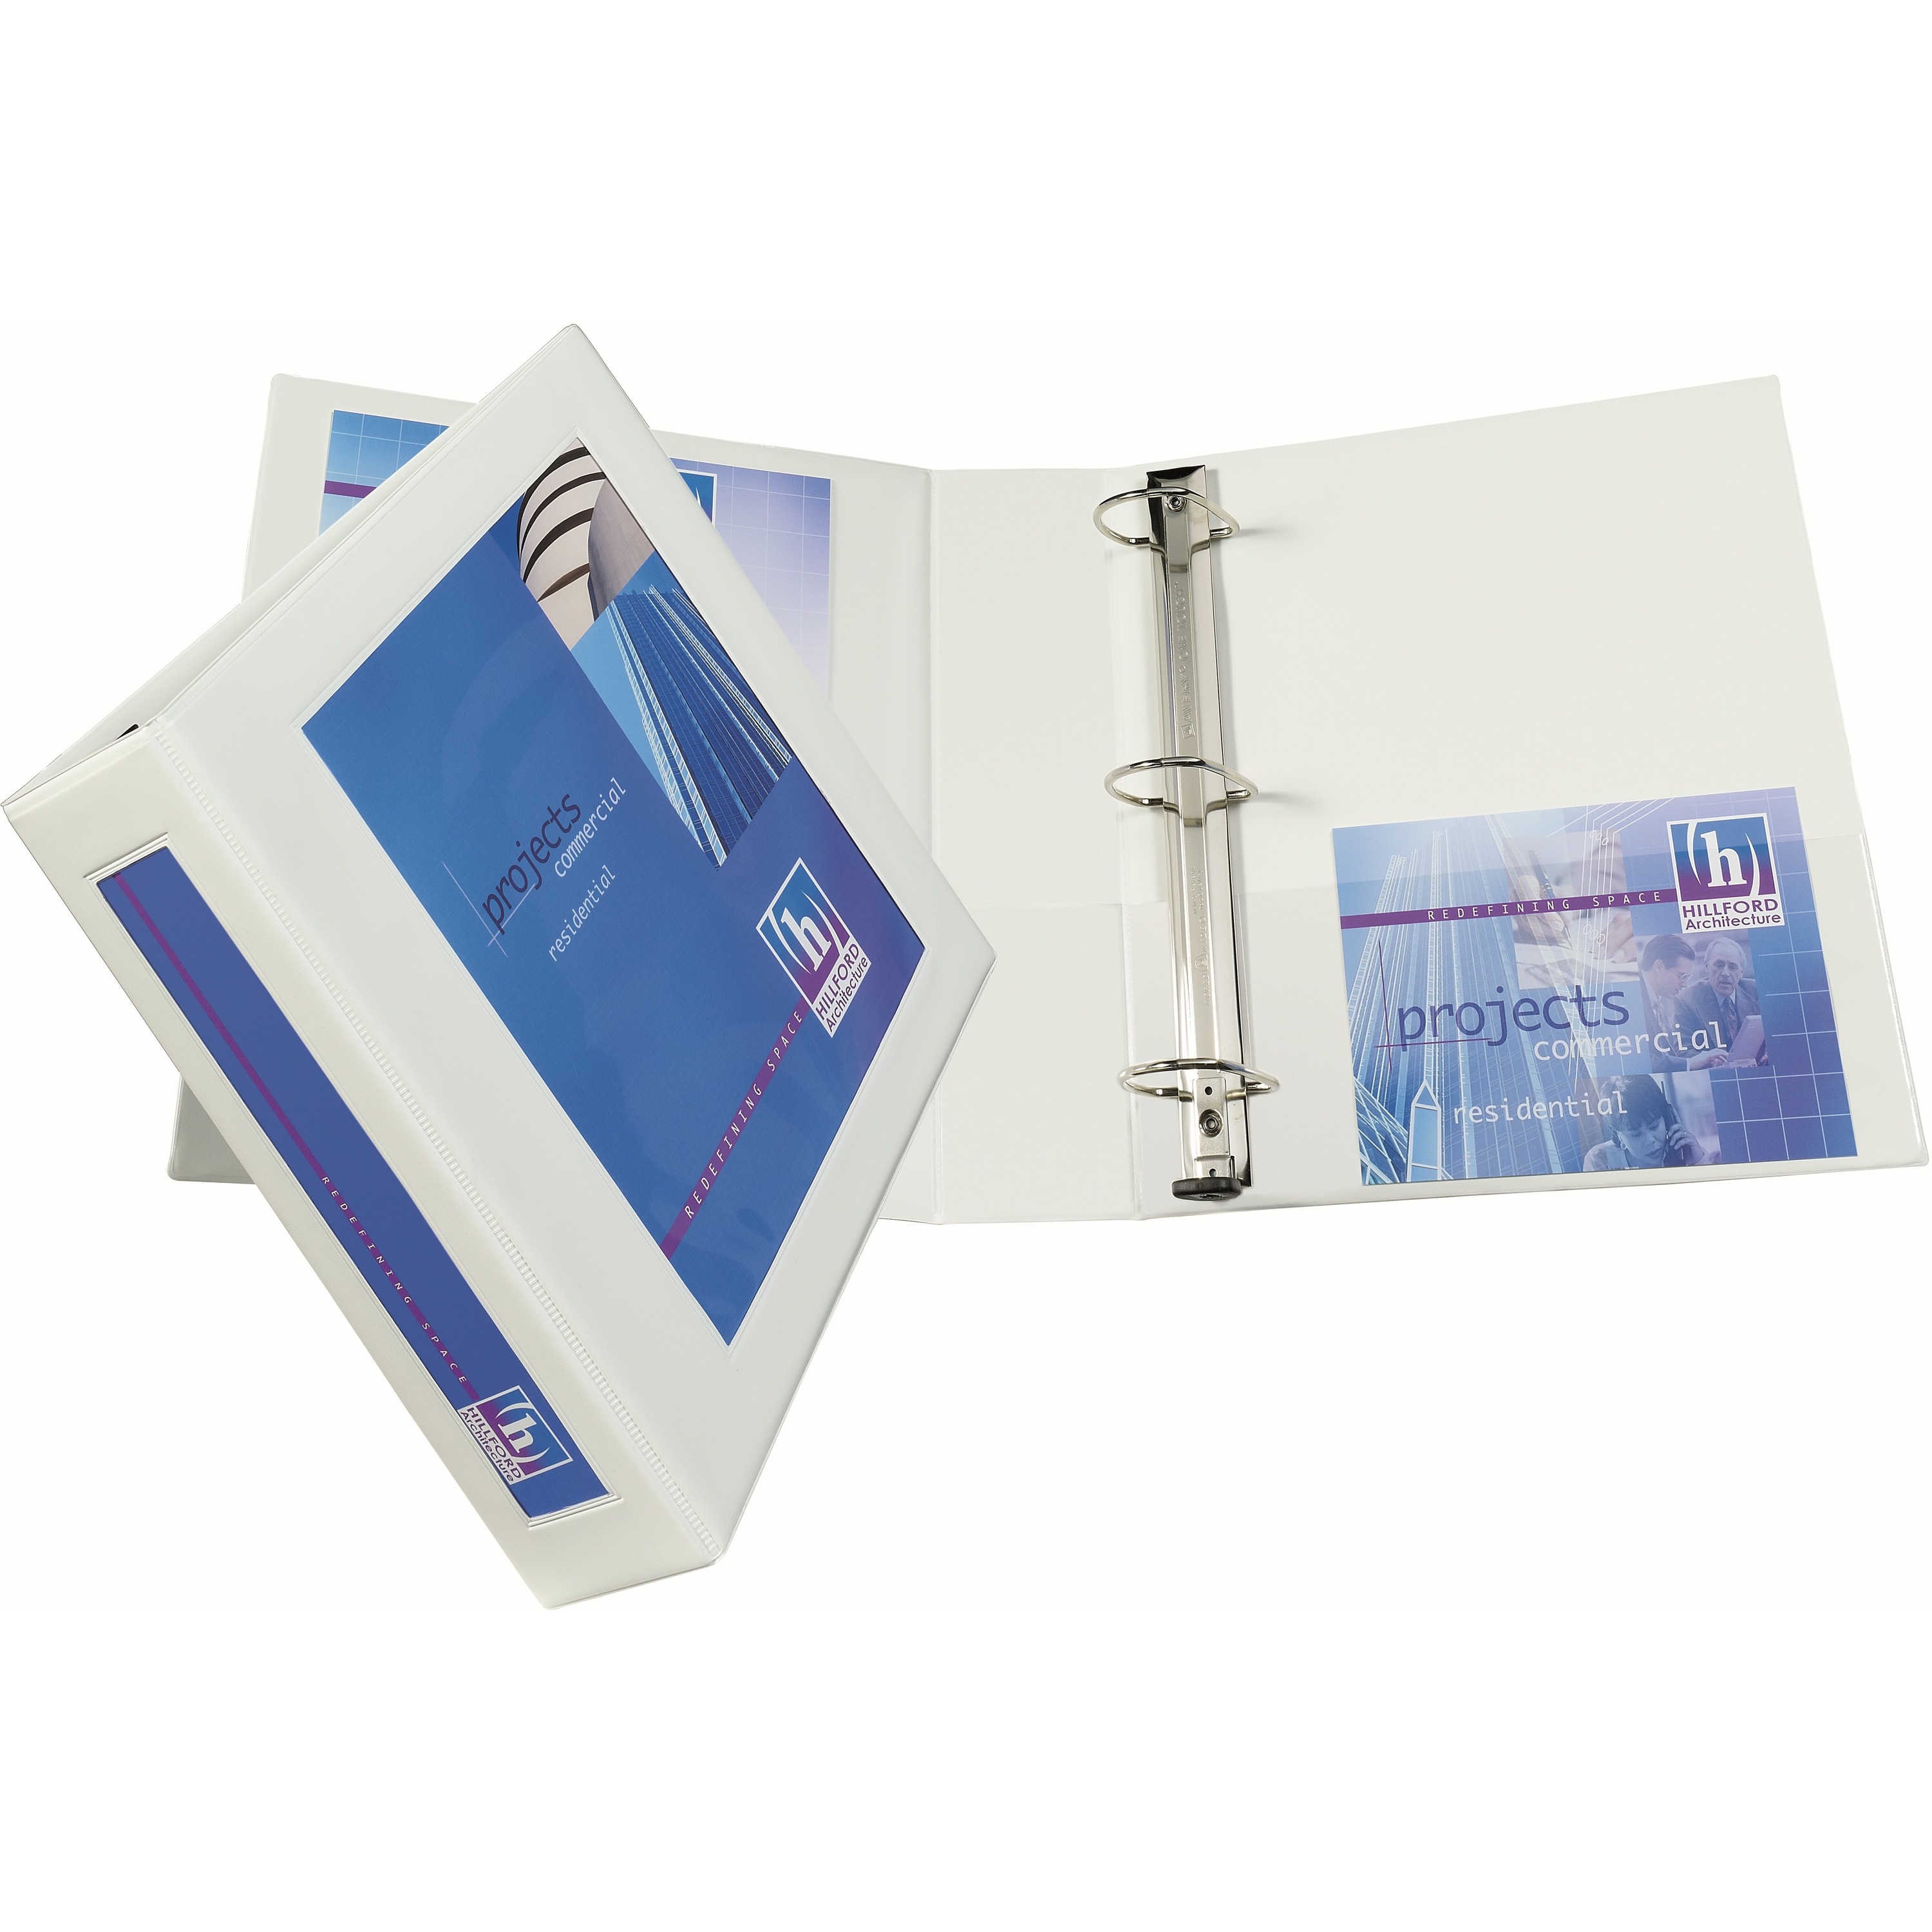 2 Heavy Duty View 3 Ring Binder 1 White Binder One Touch EZD Ring Holds 8.5 x 11 Paper